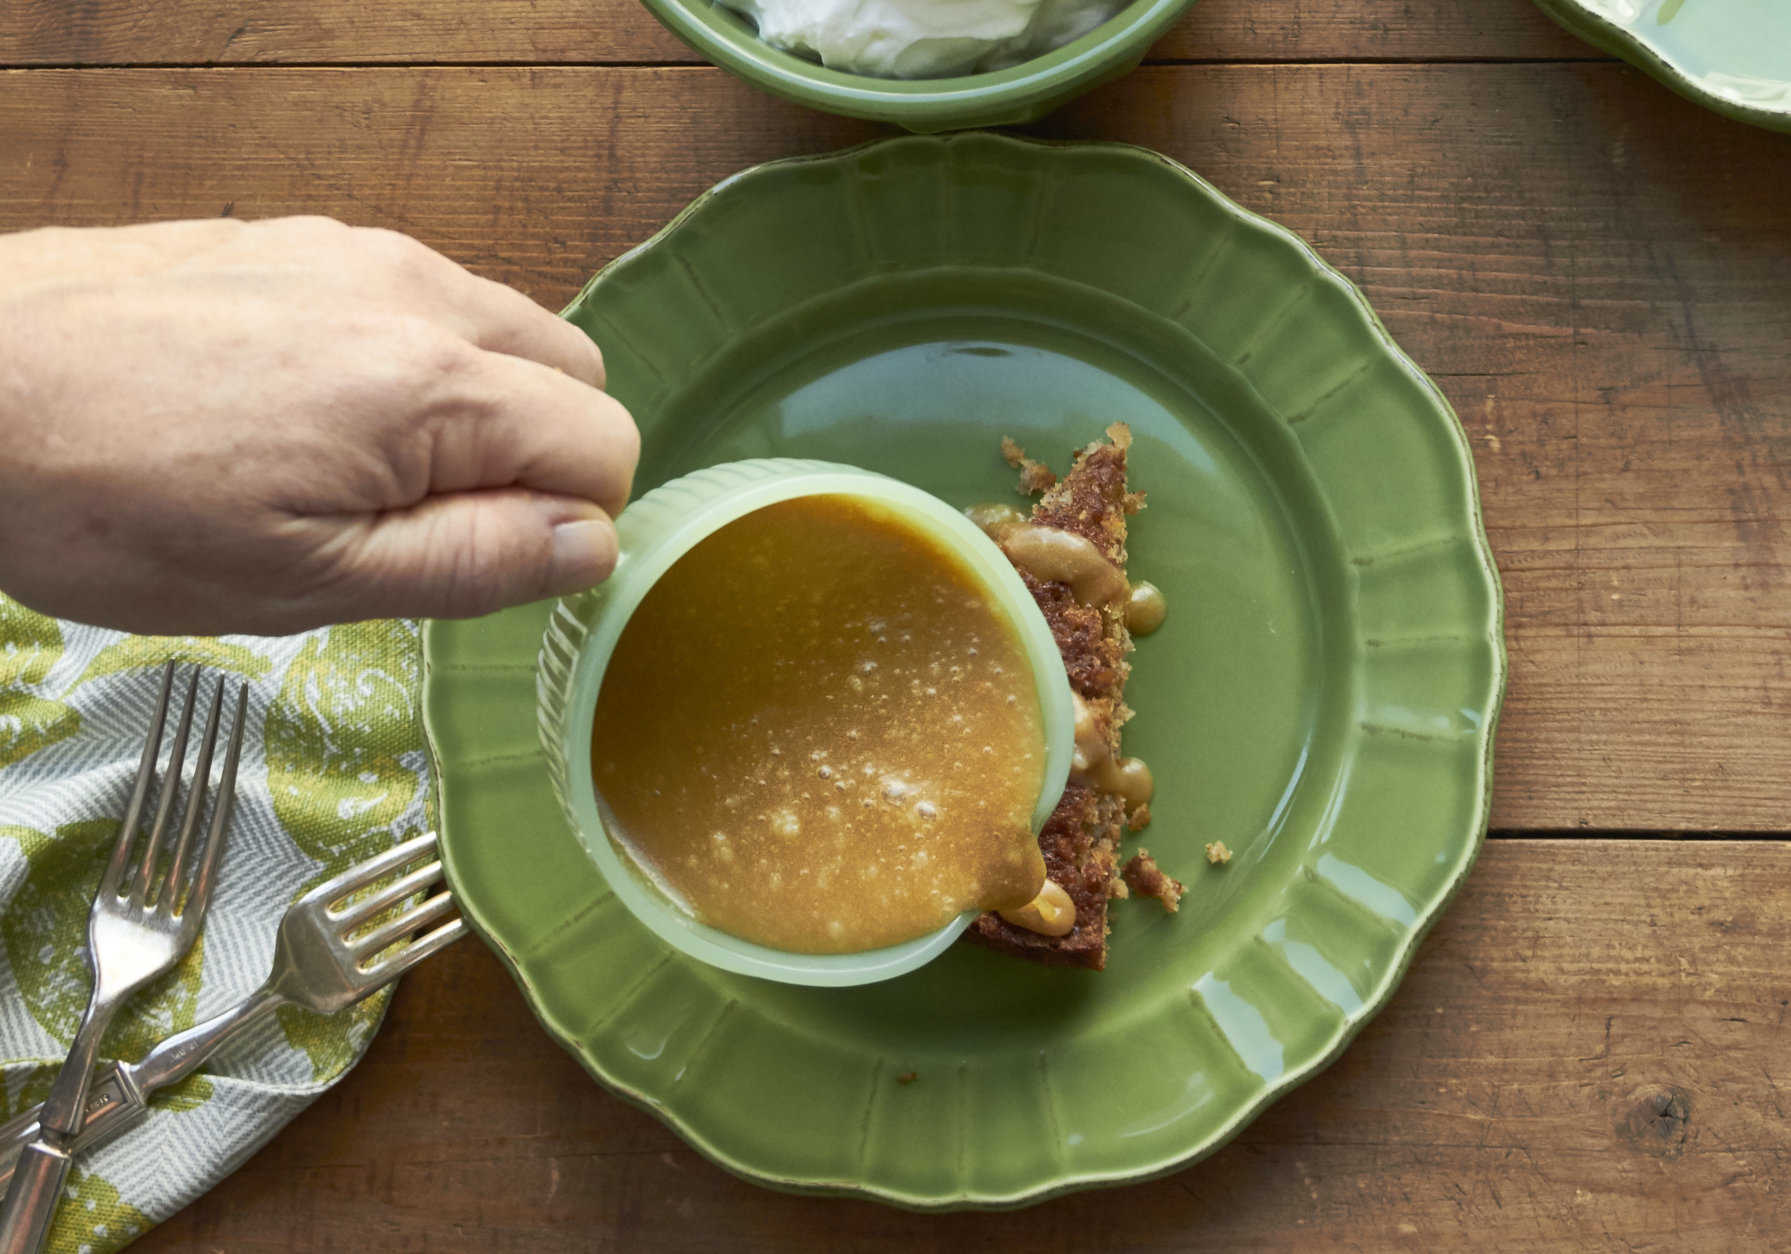 This October 2016 photo shows salted caramel sauce in New York. This dish is from a recipe by Katie Workman (Katie Workman via AP)